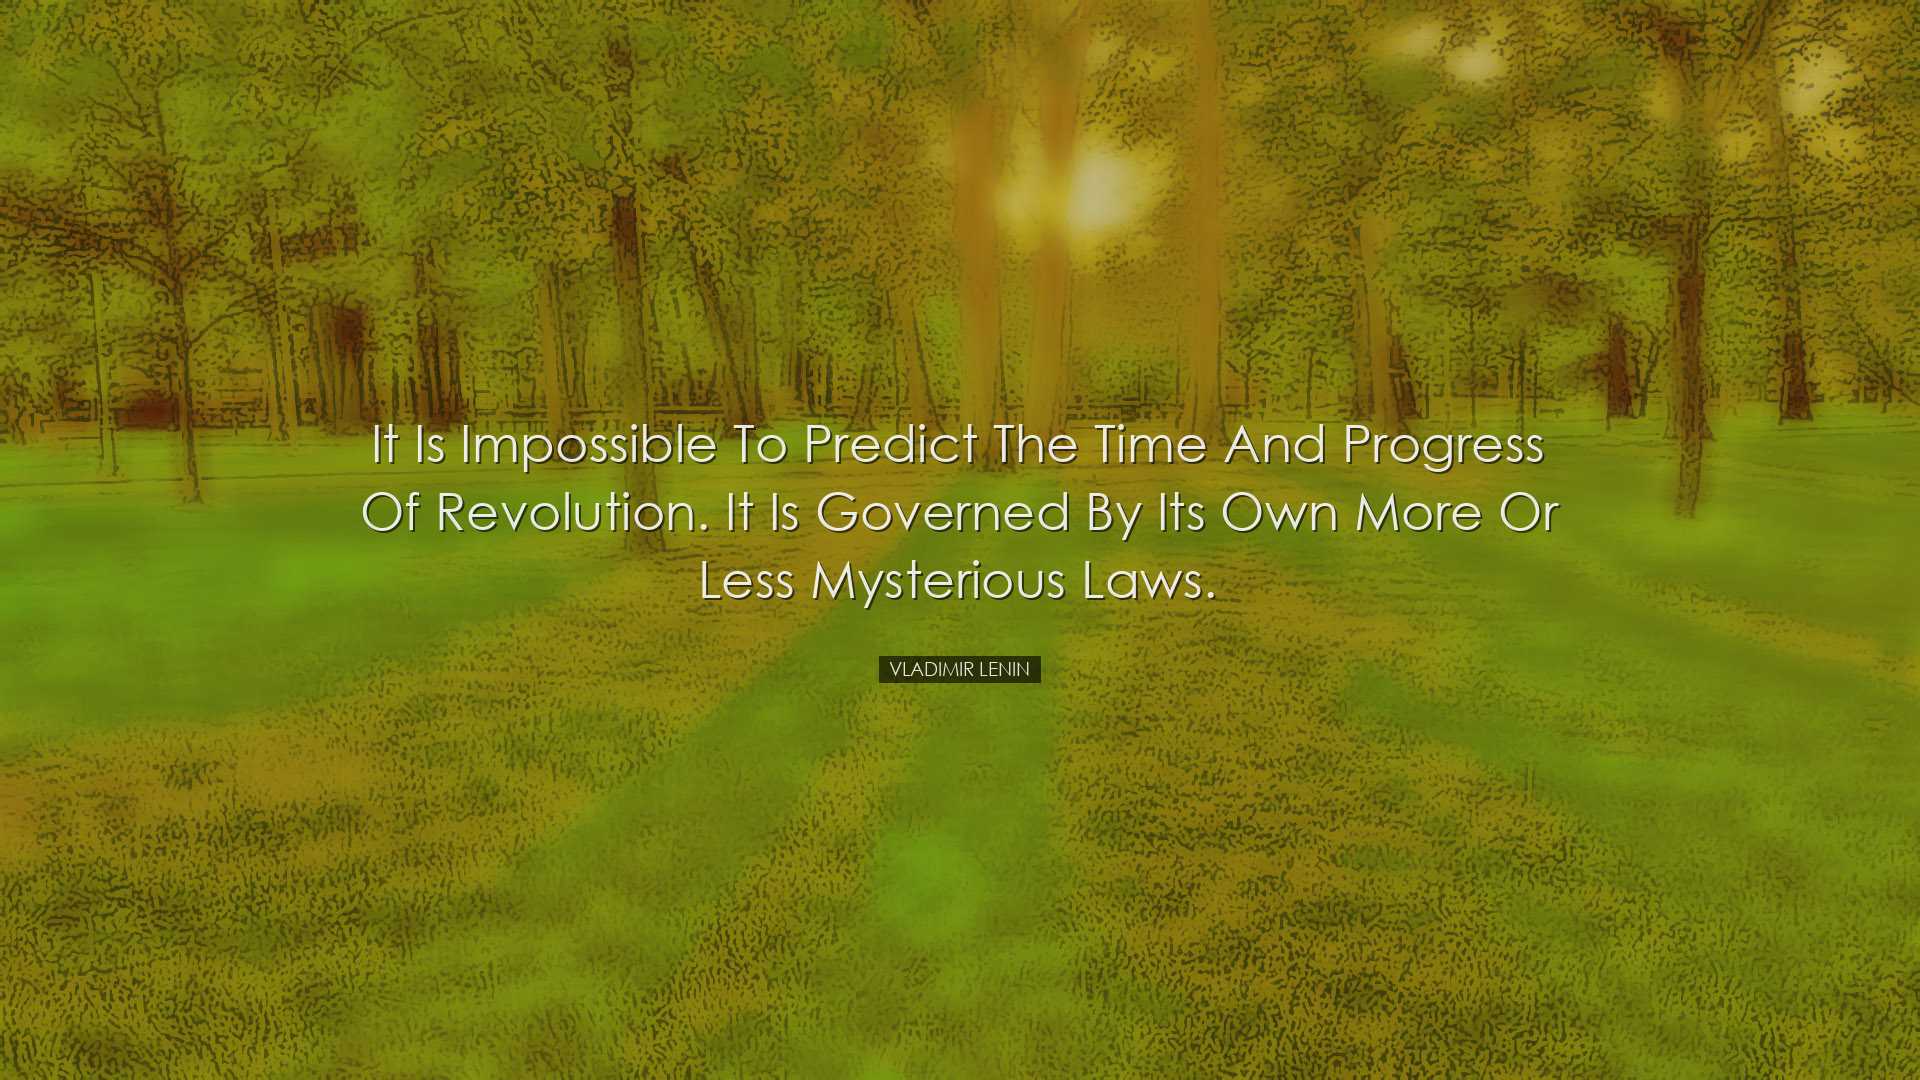 It is impossible to predict the time and progress of revolution. I